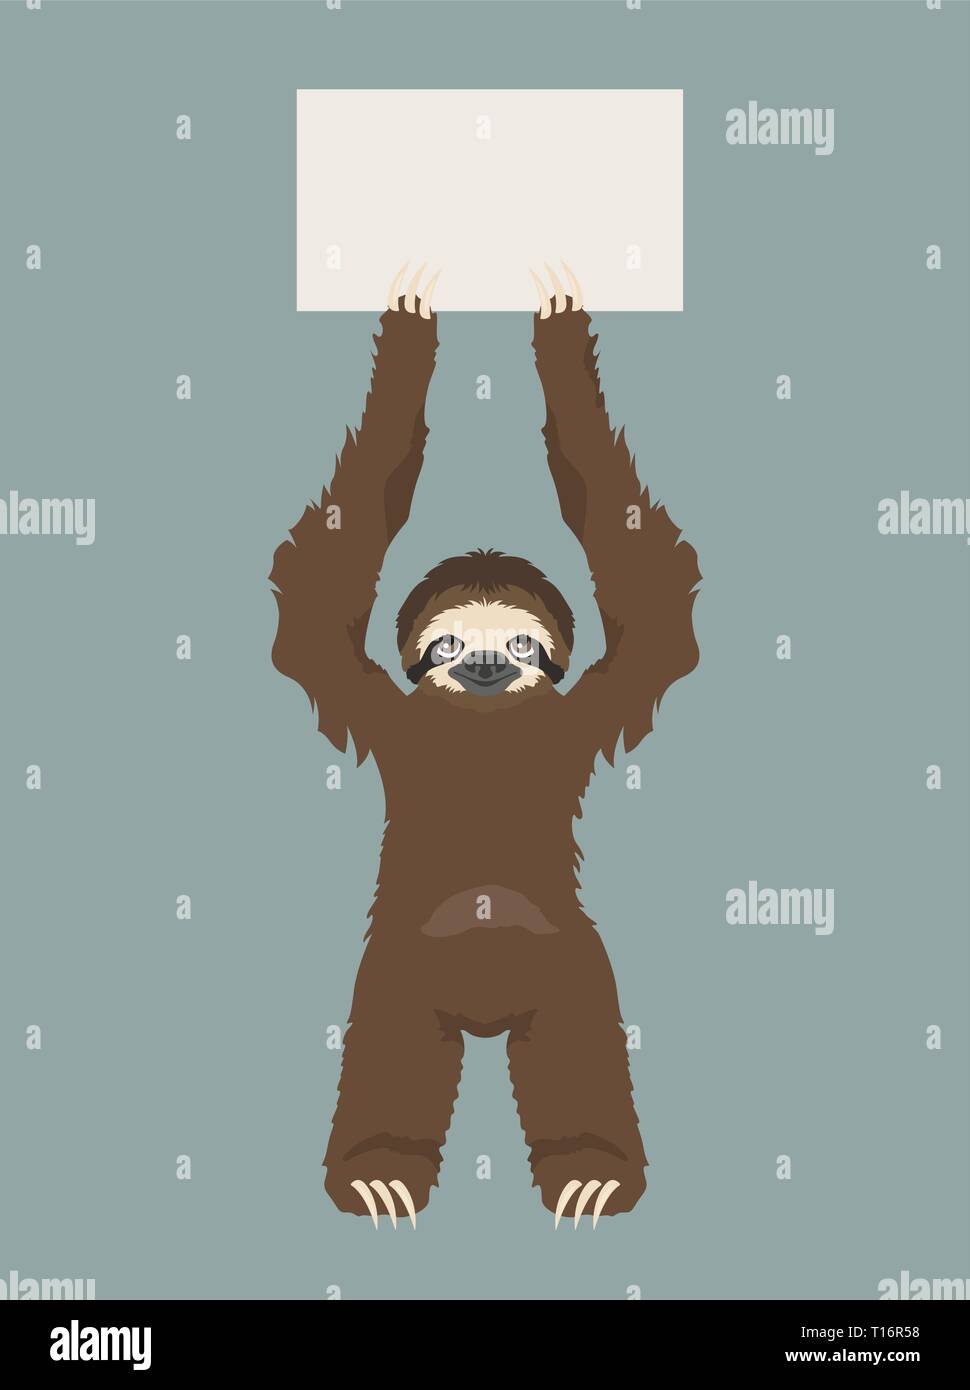 Sloth is holding a banner. Place for your advertising text. Funny cartoon animals. Vector illustration Stock Vector